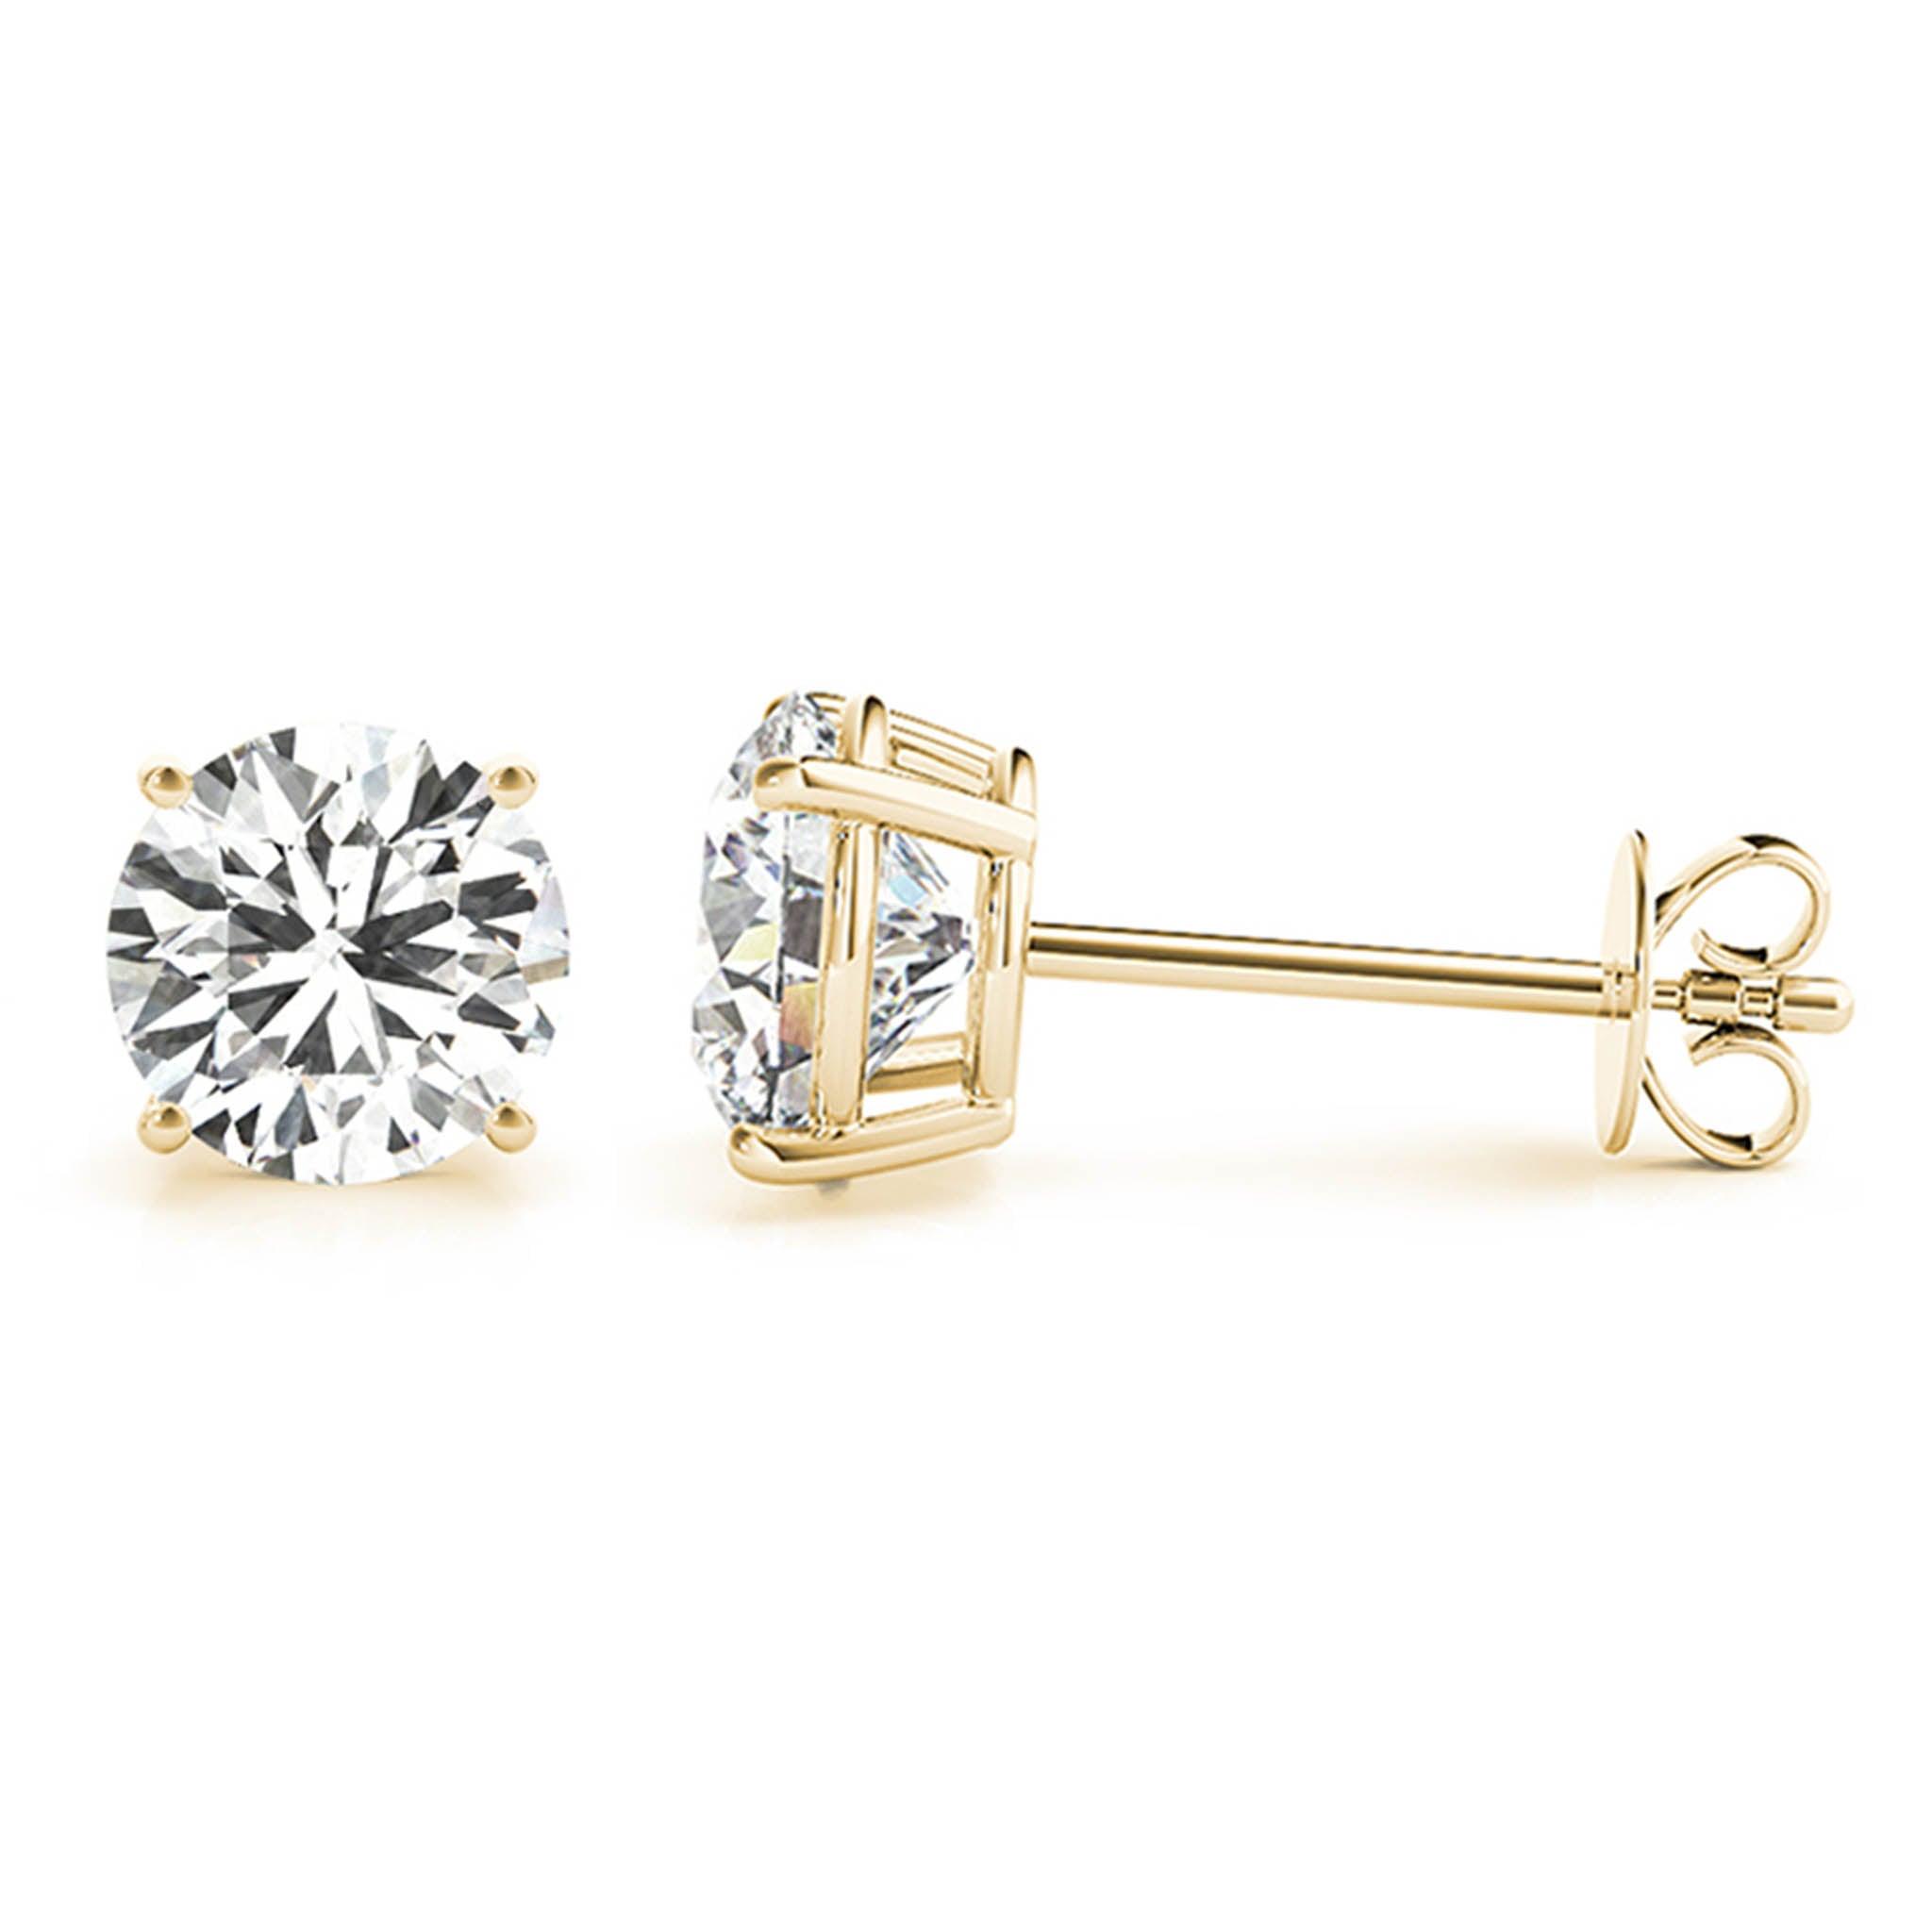 Gold 1.50 carat Lab Grown Diamond Ear Studs / Earrings.  Total diamond weight 1.50 carats.  4 claw setting. 14ct yellow gold version. 